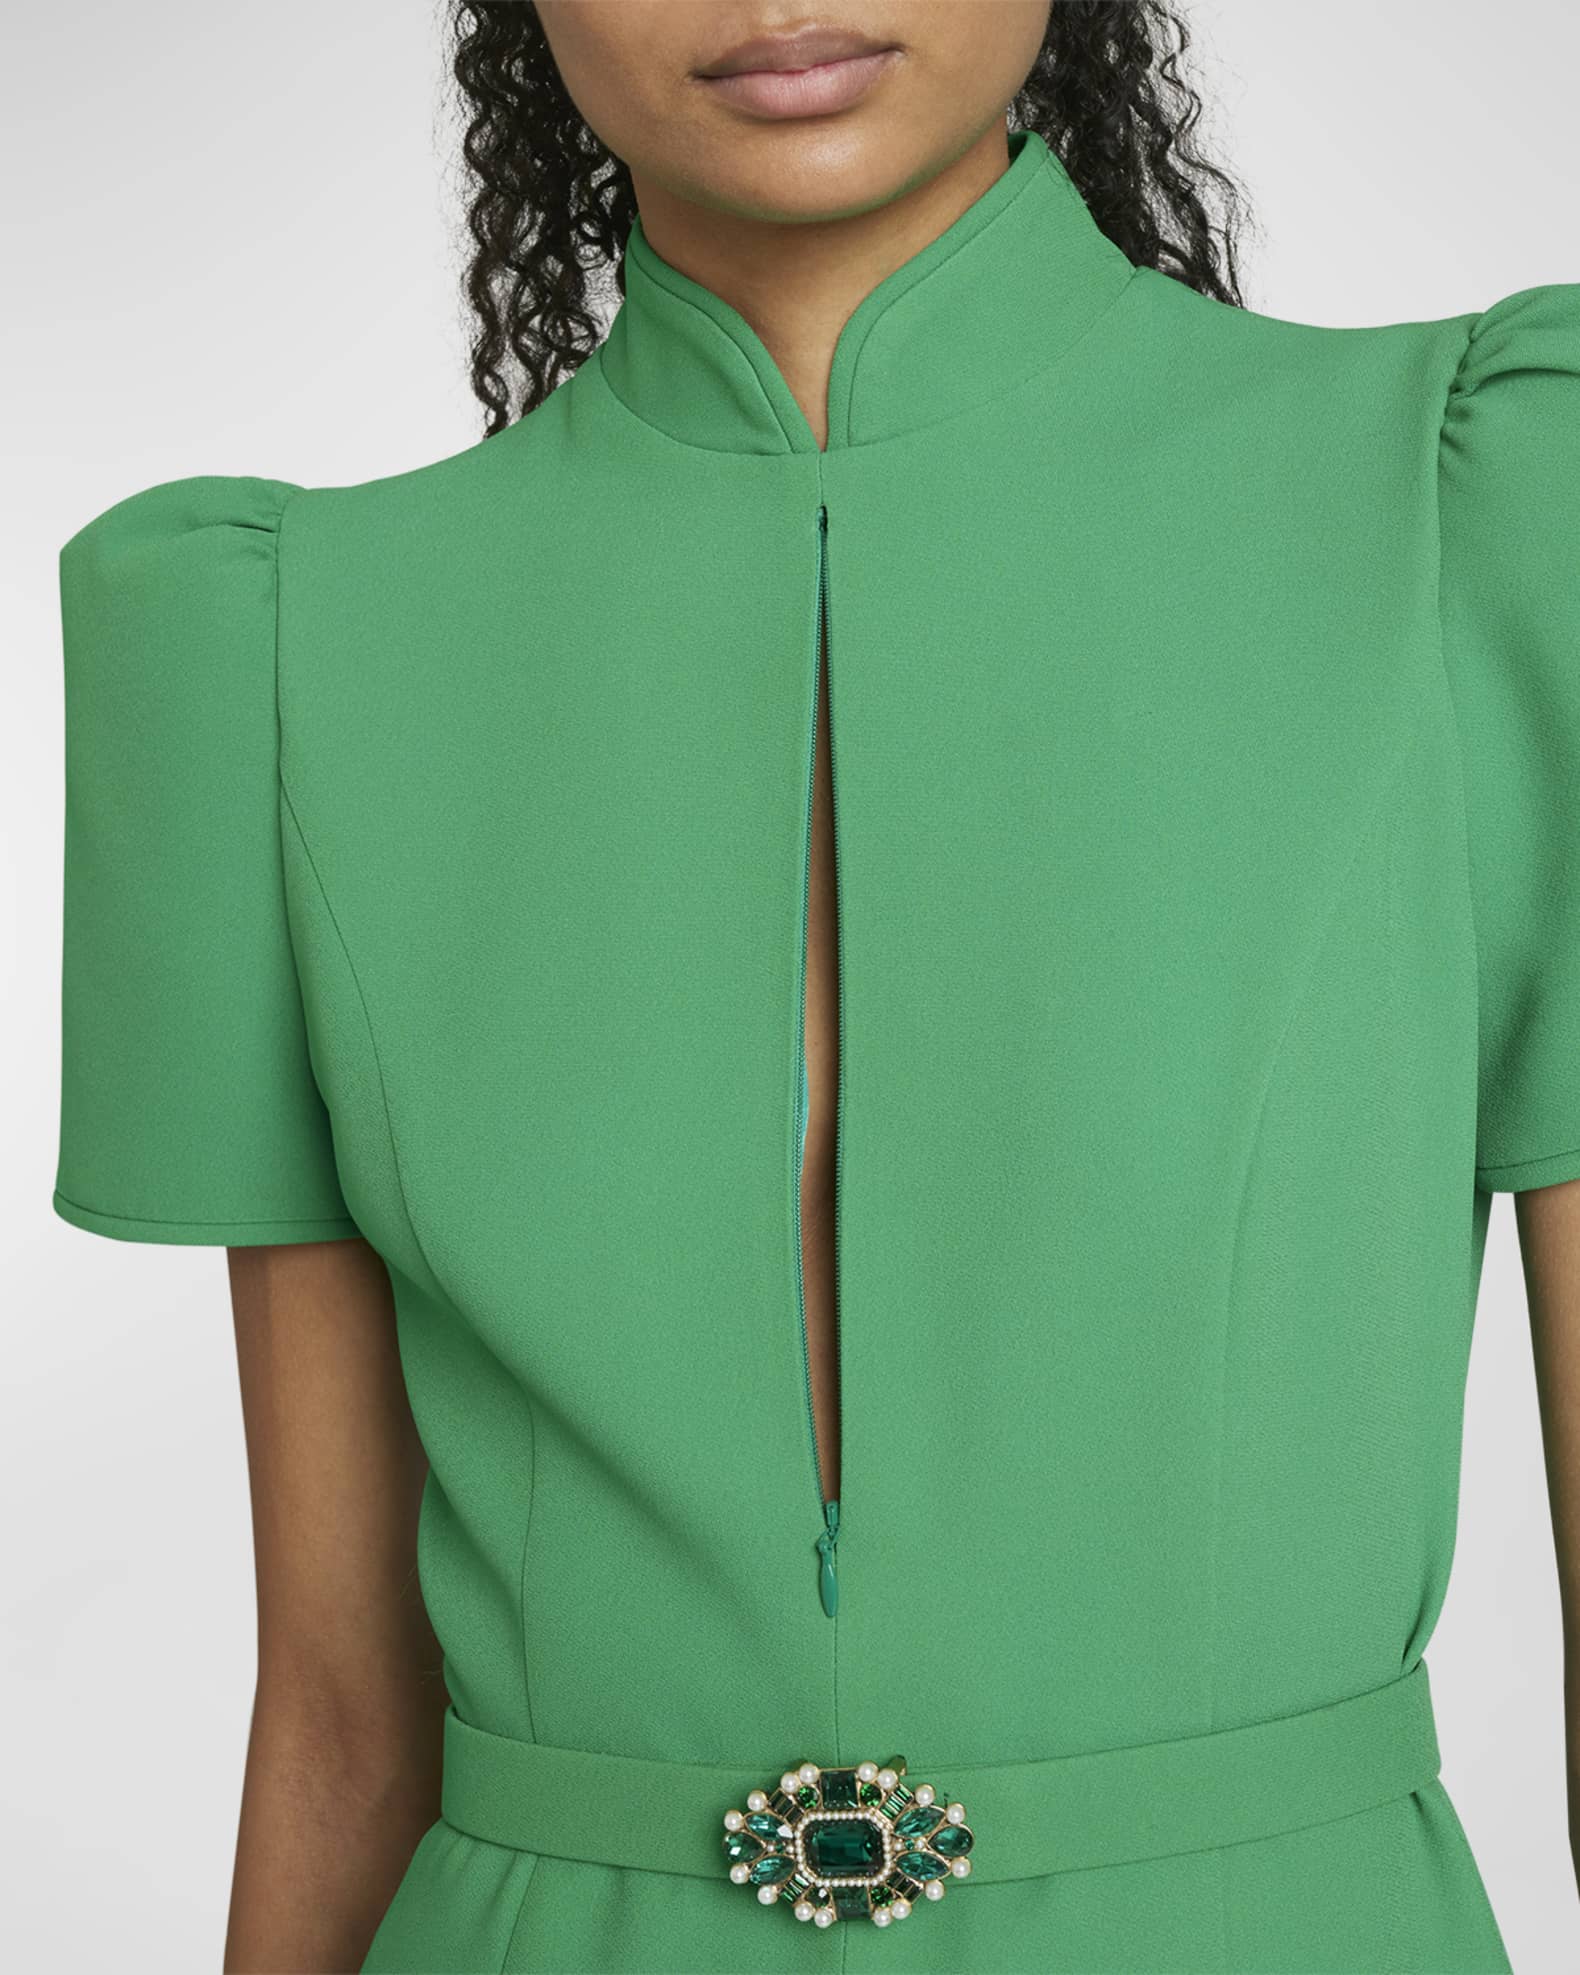 Andrew Gn Crystal-Embellished Belted Trumpet Midi Dress | Neiman Marcus